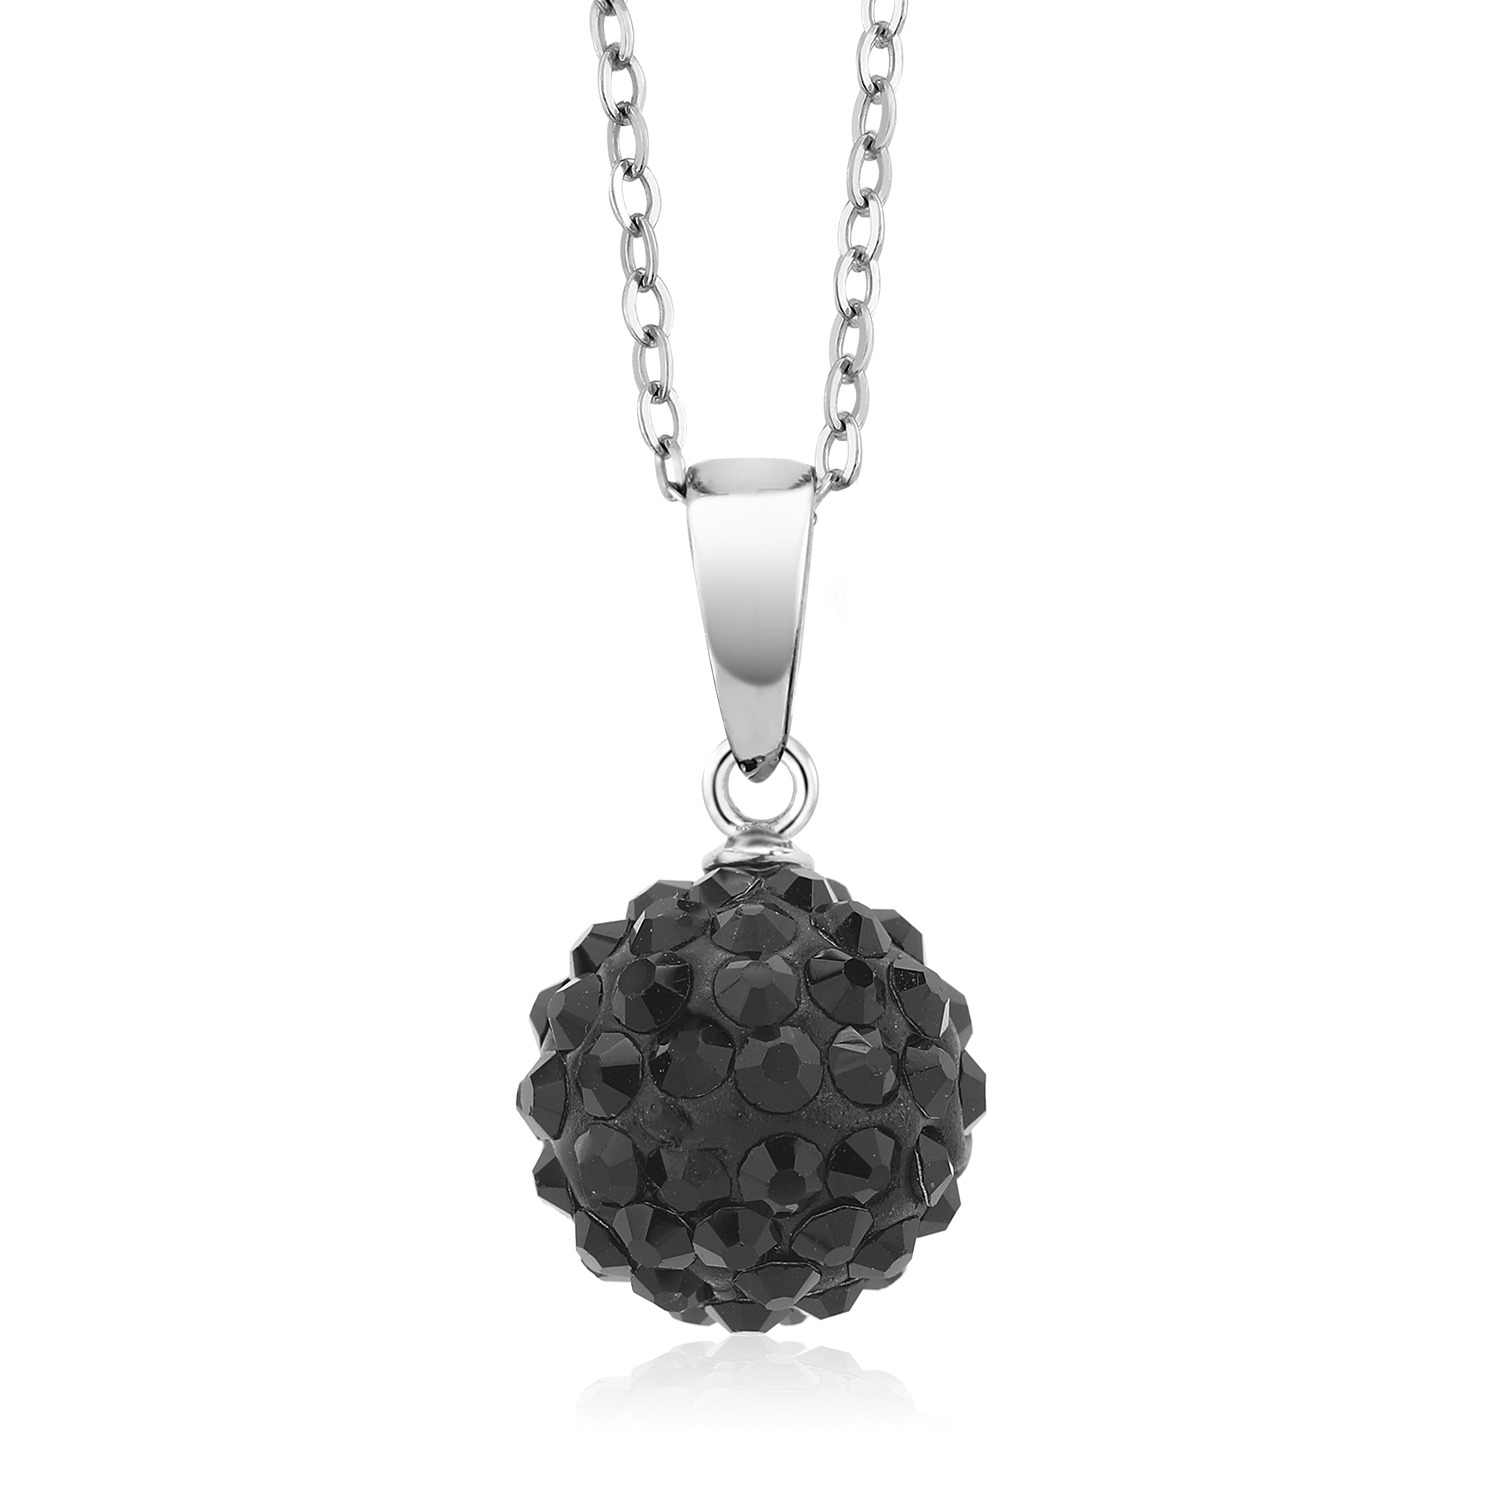 Gem Stone King Hot 12MM Round Black Pave Disco Ball Pendant With 18" Stainless Steel Chain